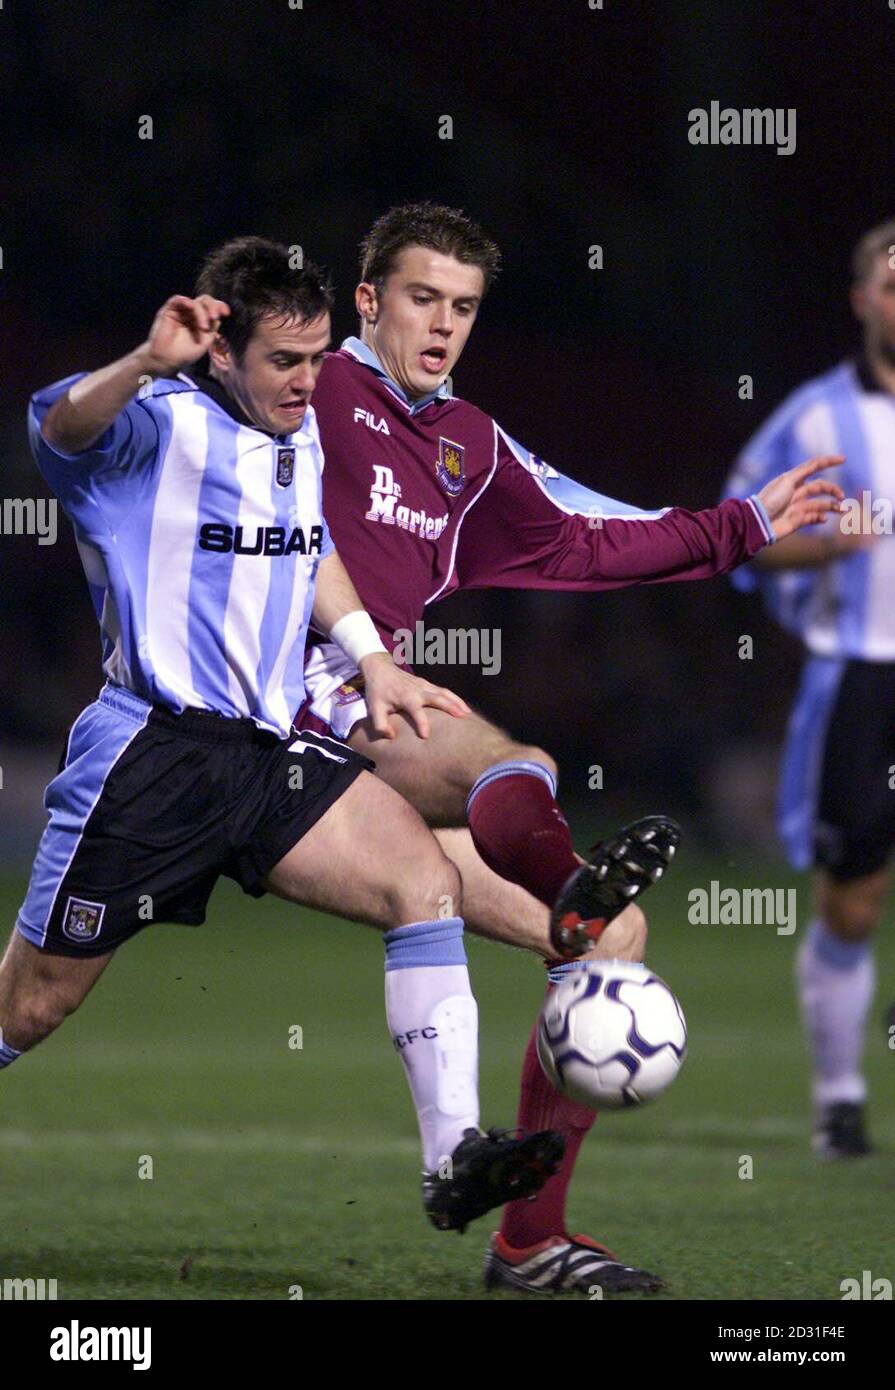 West Ham United's Michael Carrick, right, tussles with Coventry City's David Thompson during the Premiership game at Upton Park, London, Stock Photo